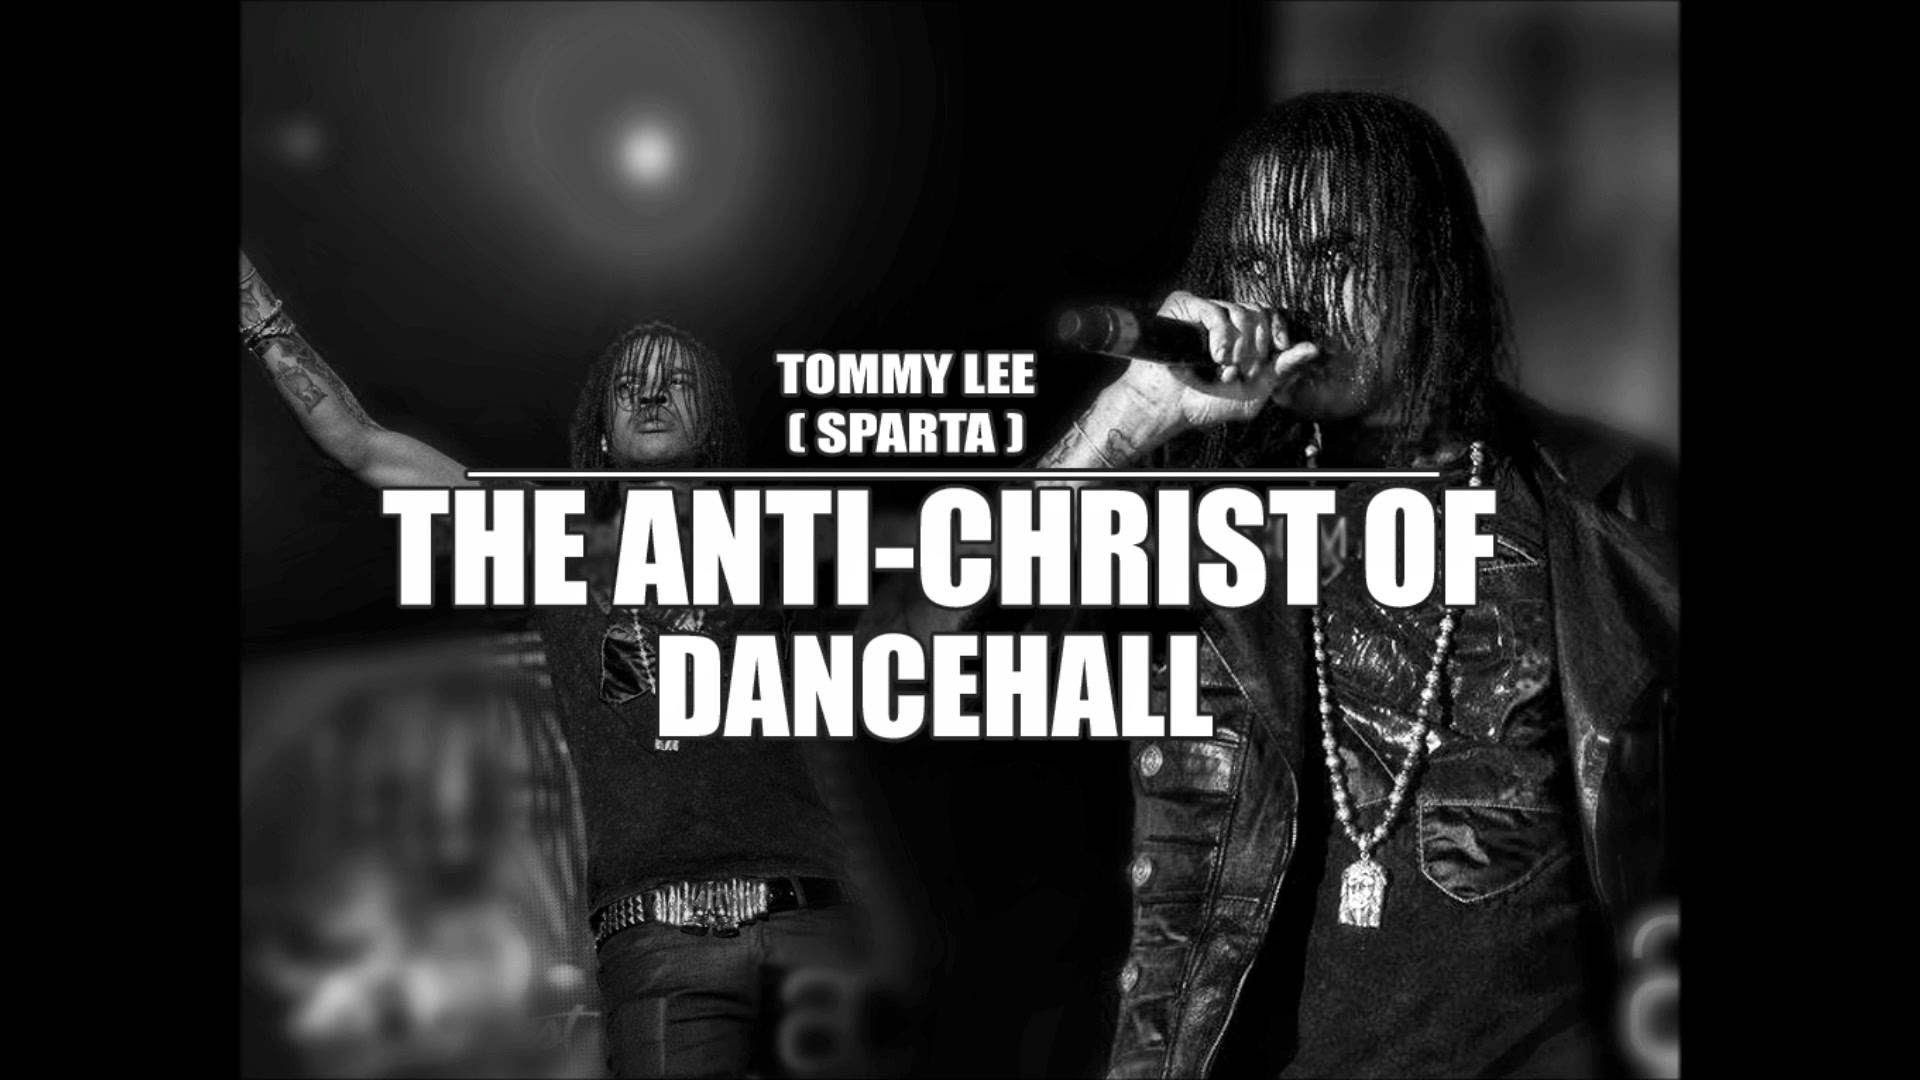 1920x1080 Tommy Lee Sparta - The Illuminati Puppet, Mason, Satanist who sold his soul  to the devil - YouTube